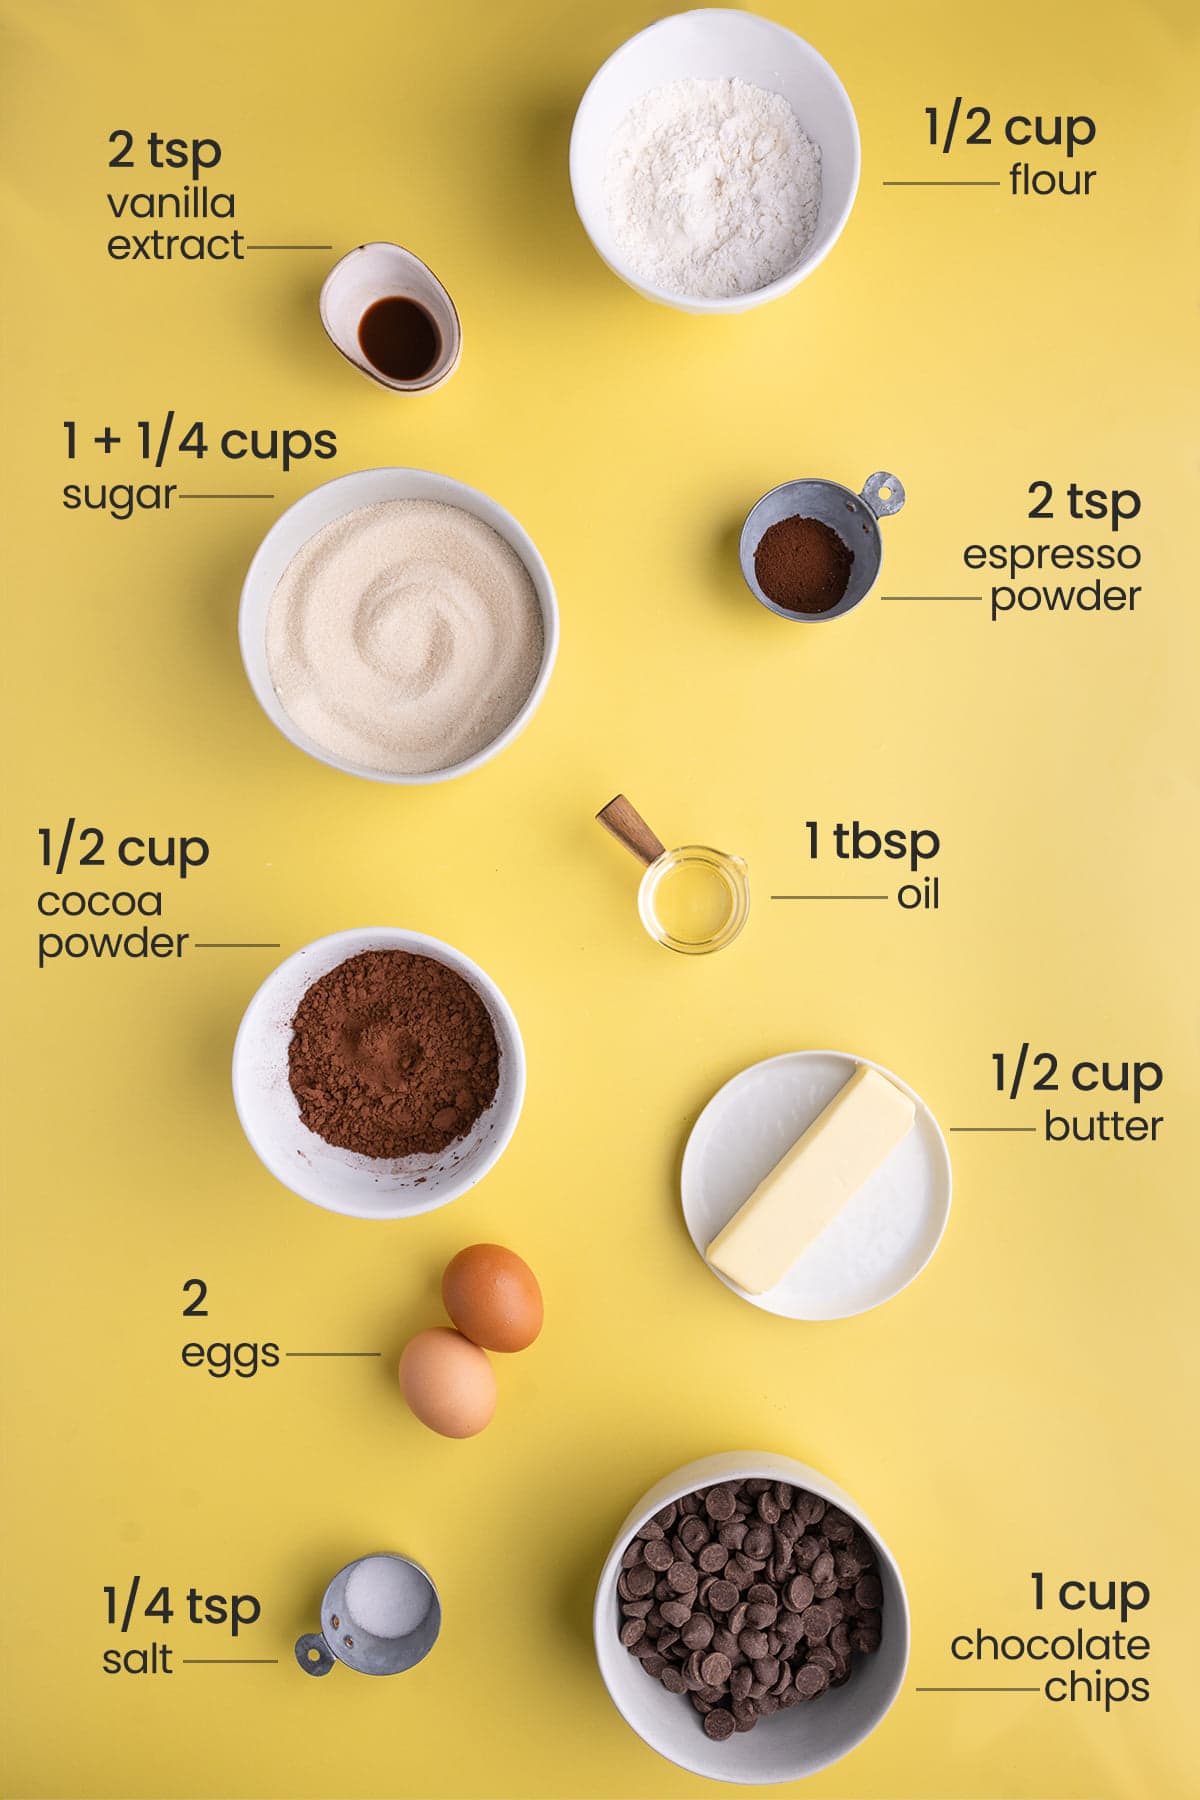 Ingredients for One-Bowl Fudgy Chocolate Brownies including flour, vanilla extract, espresso powder, granulated sugar, oil, cocoa powder, unsalted butter, eggs, salt, and chocolate chips